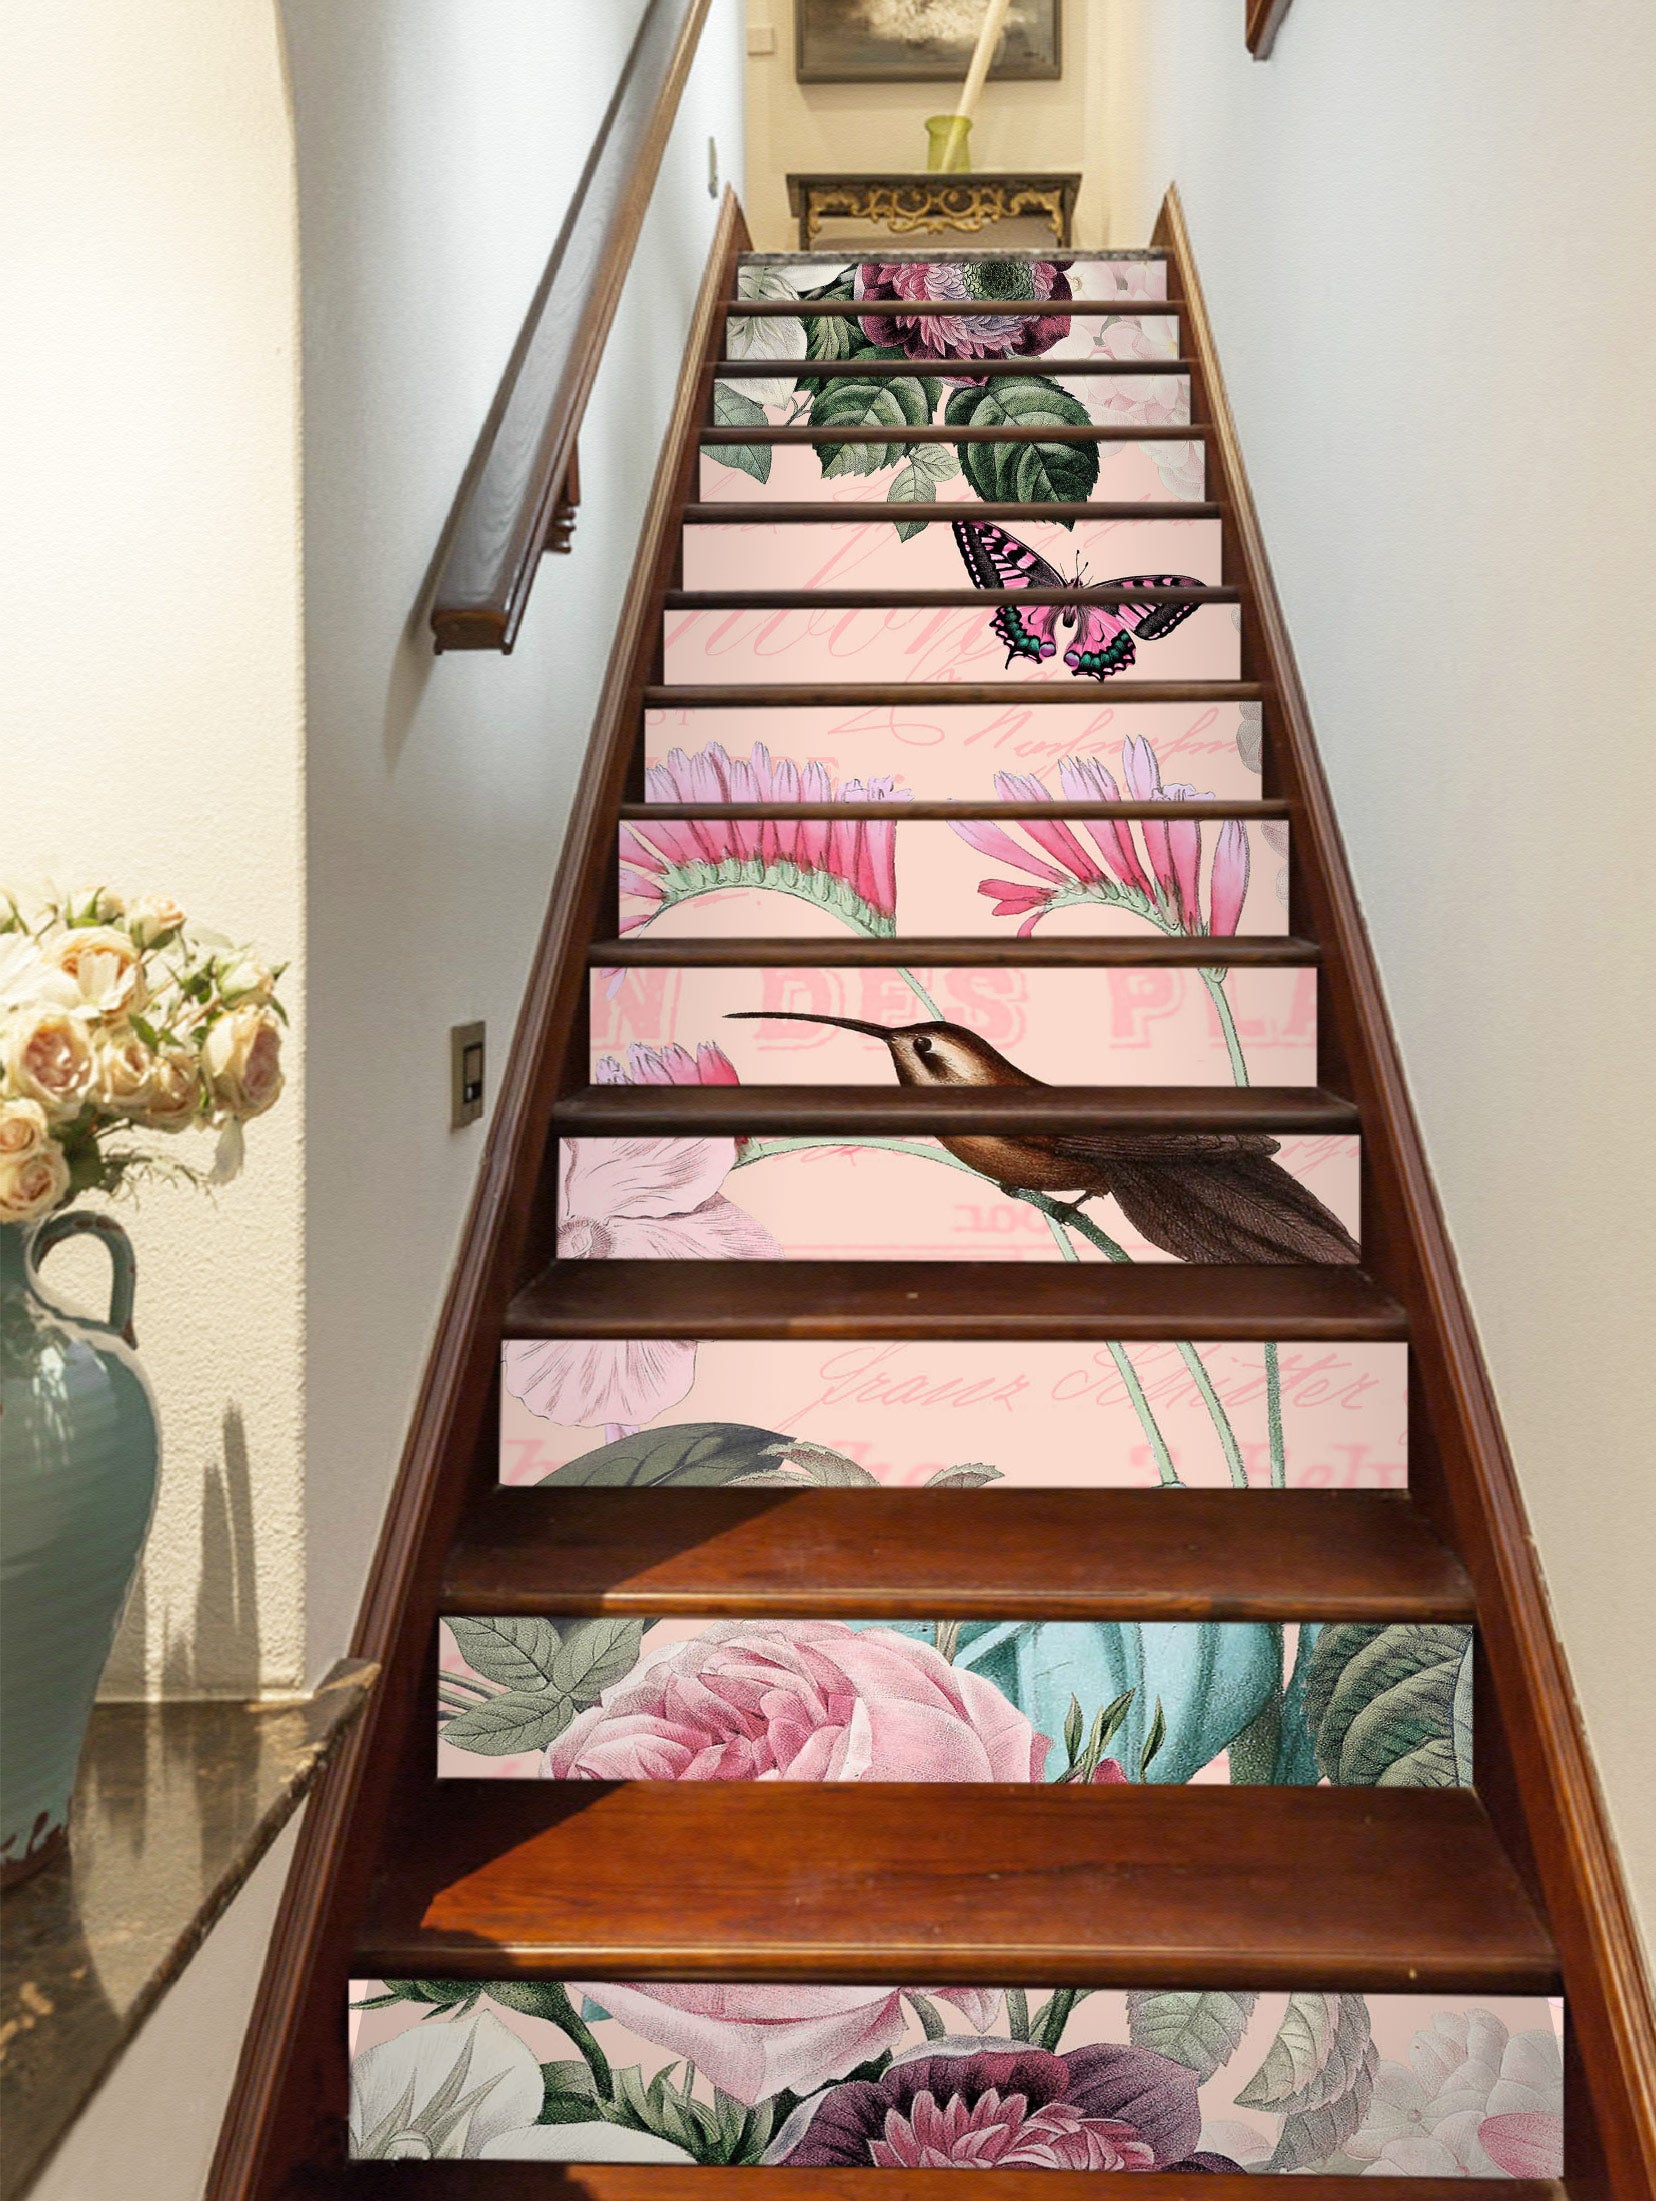 3D Pink Flower Butterfly 10492 Andrea Haase Stair Risers